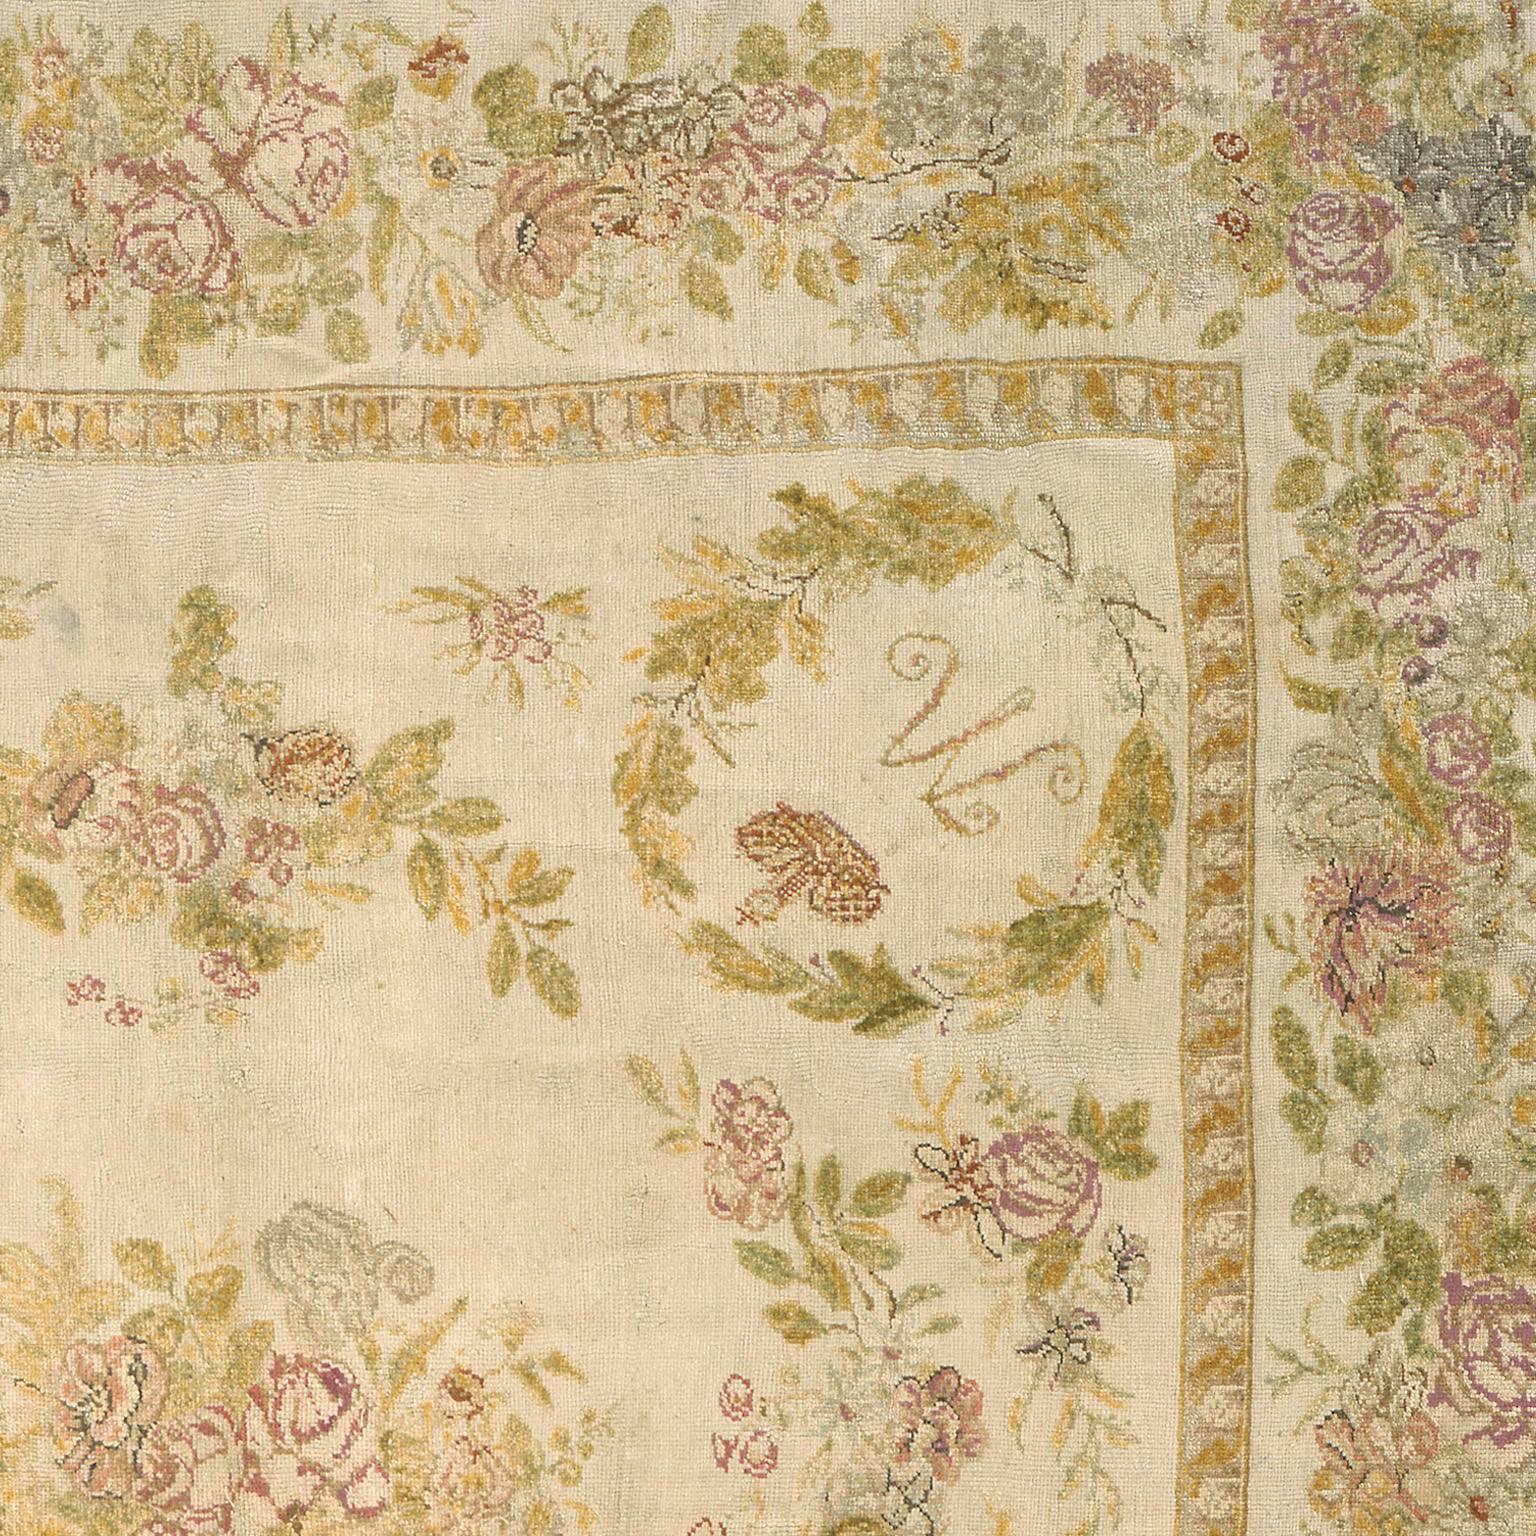 18th Century Russian Pile Rug, 1780-1800